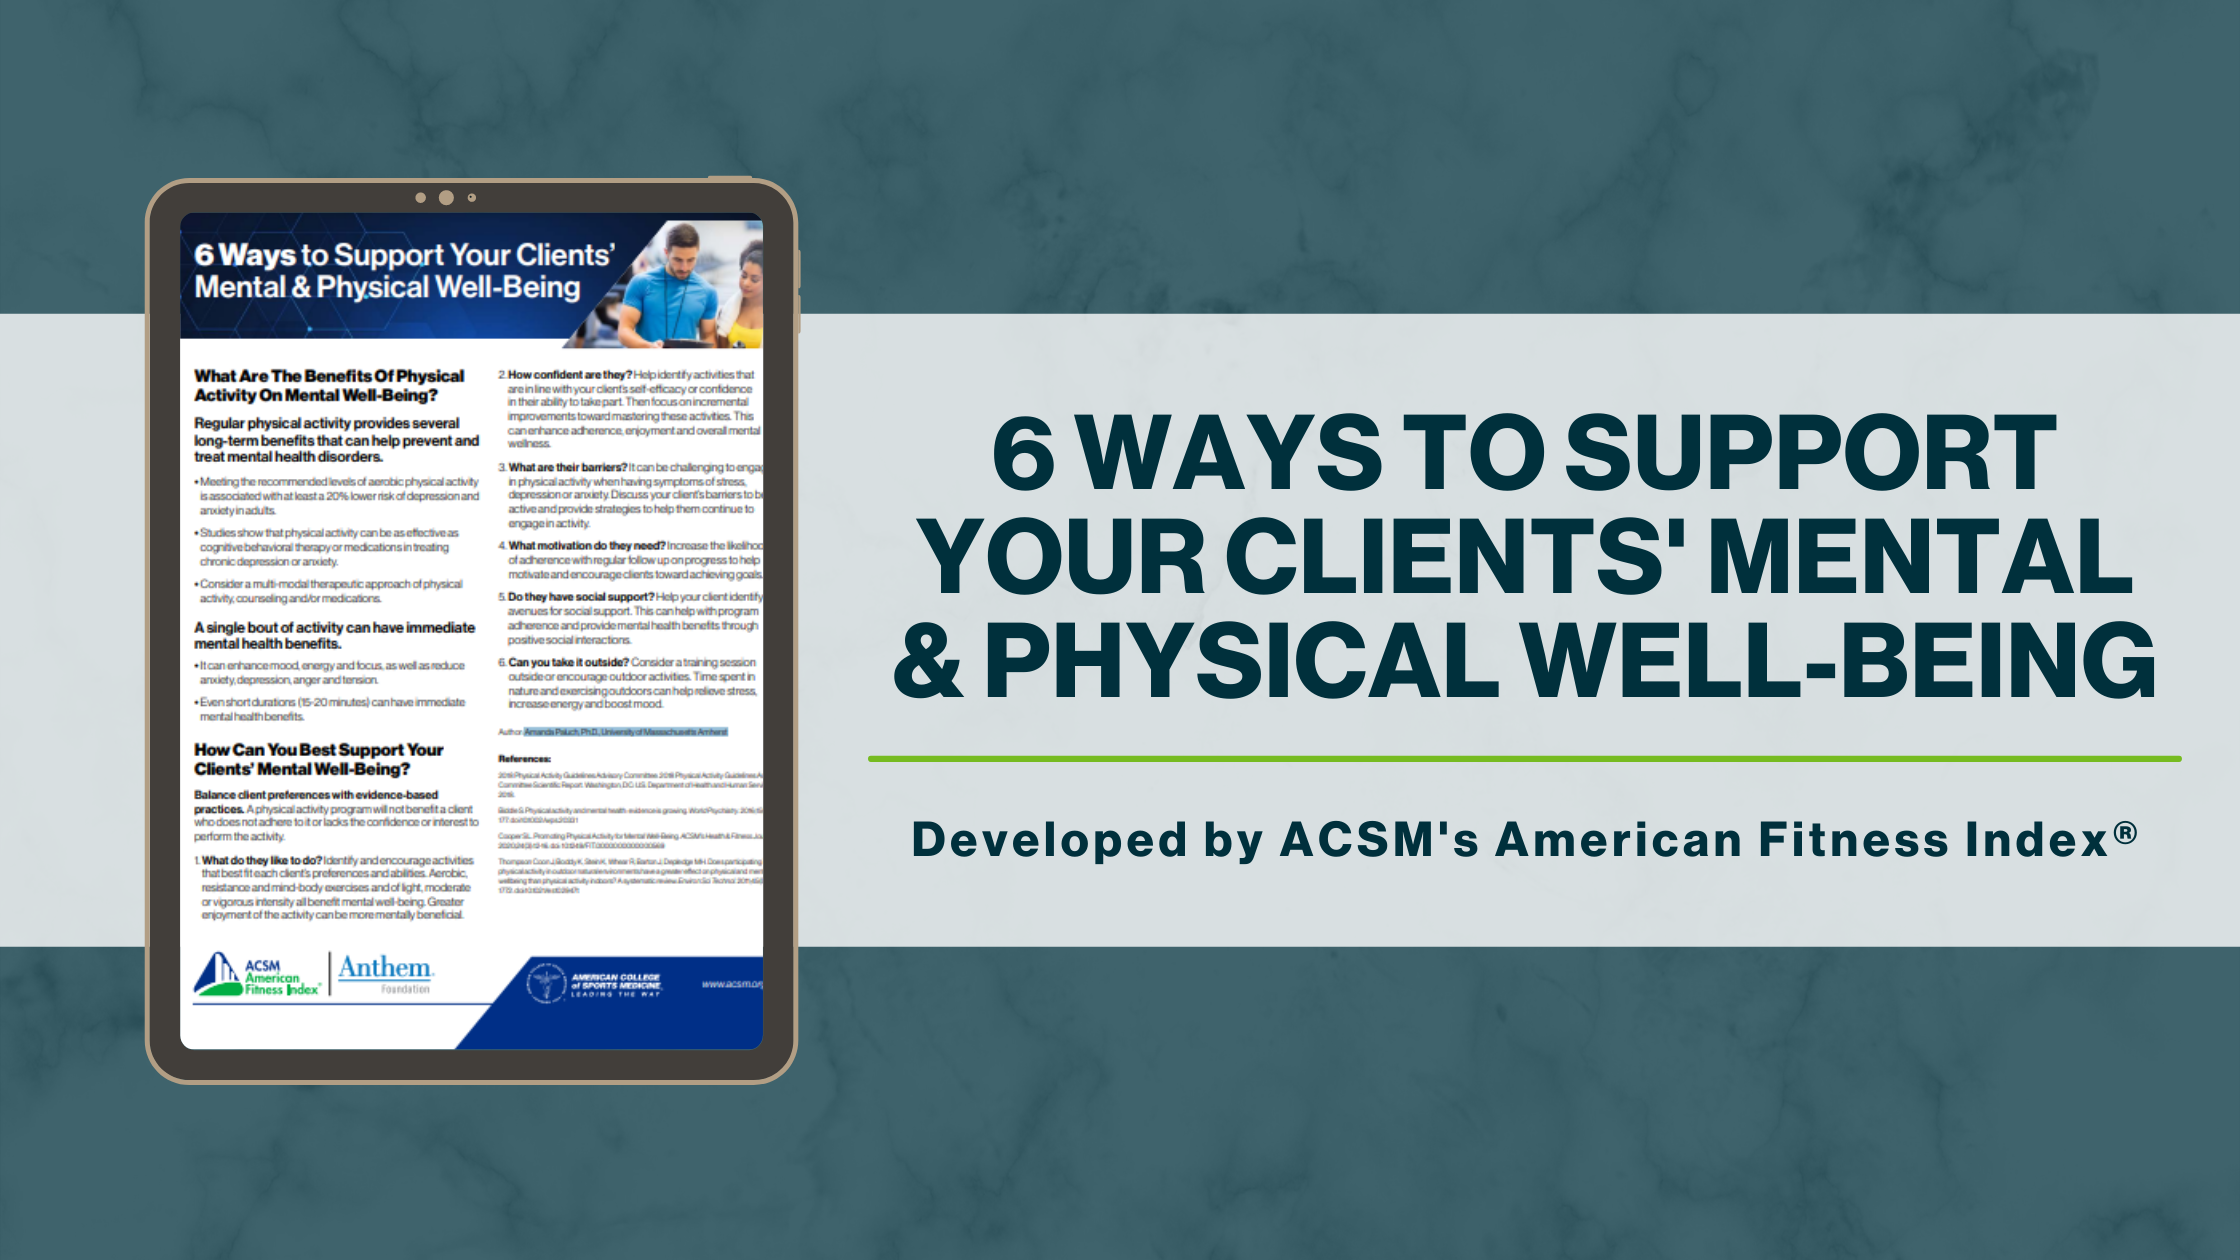 6 Ways to Support your Clients' Mental & Physical Well-Being